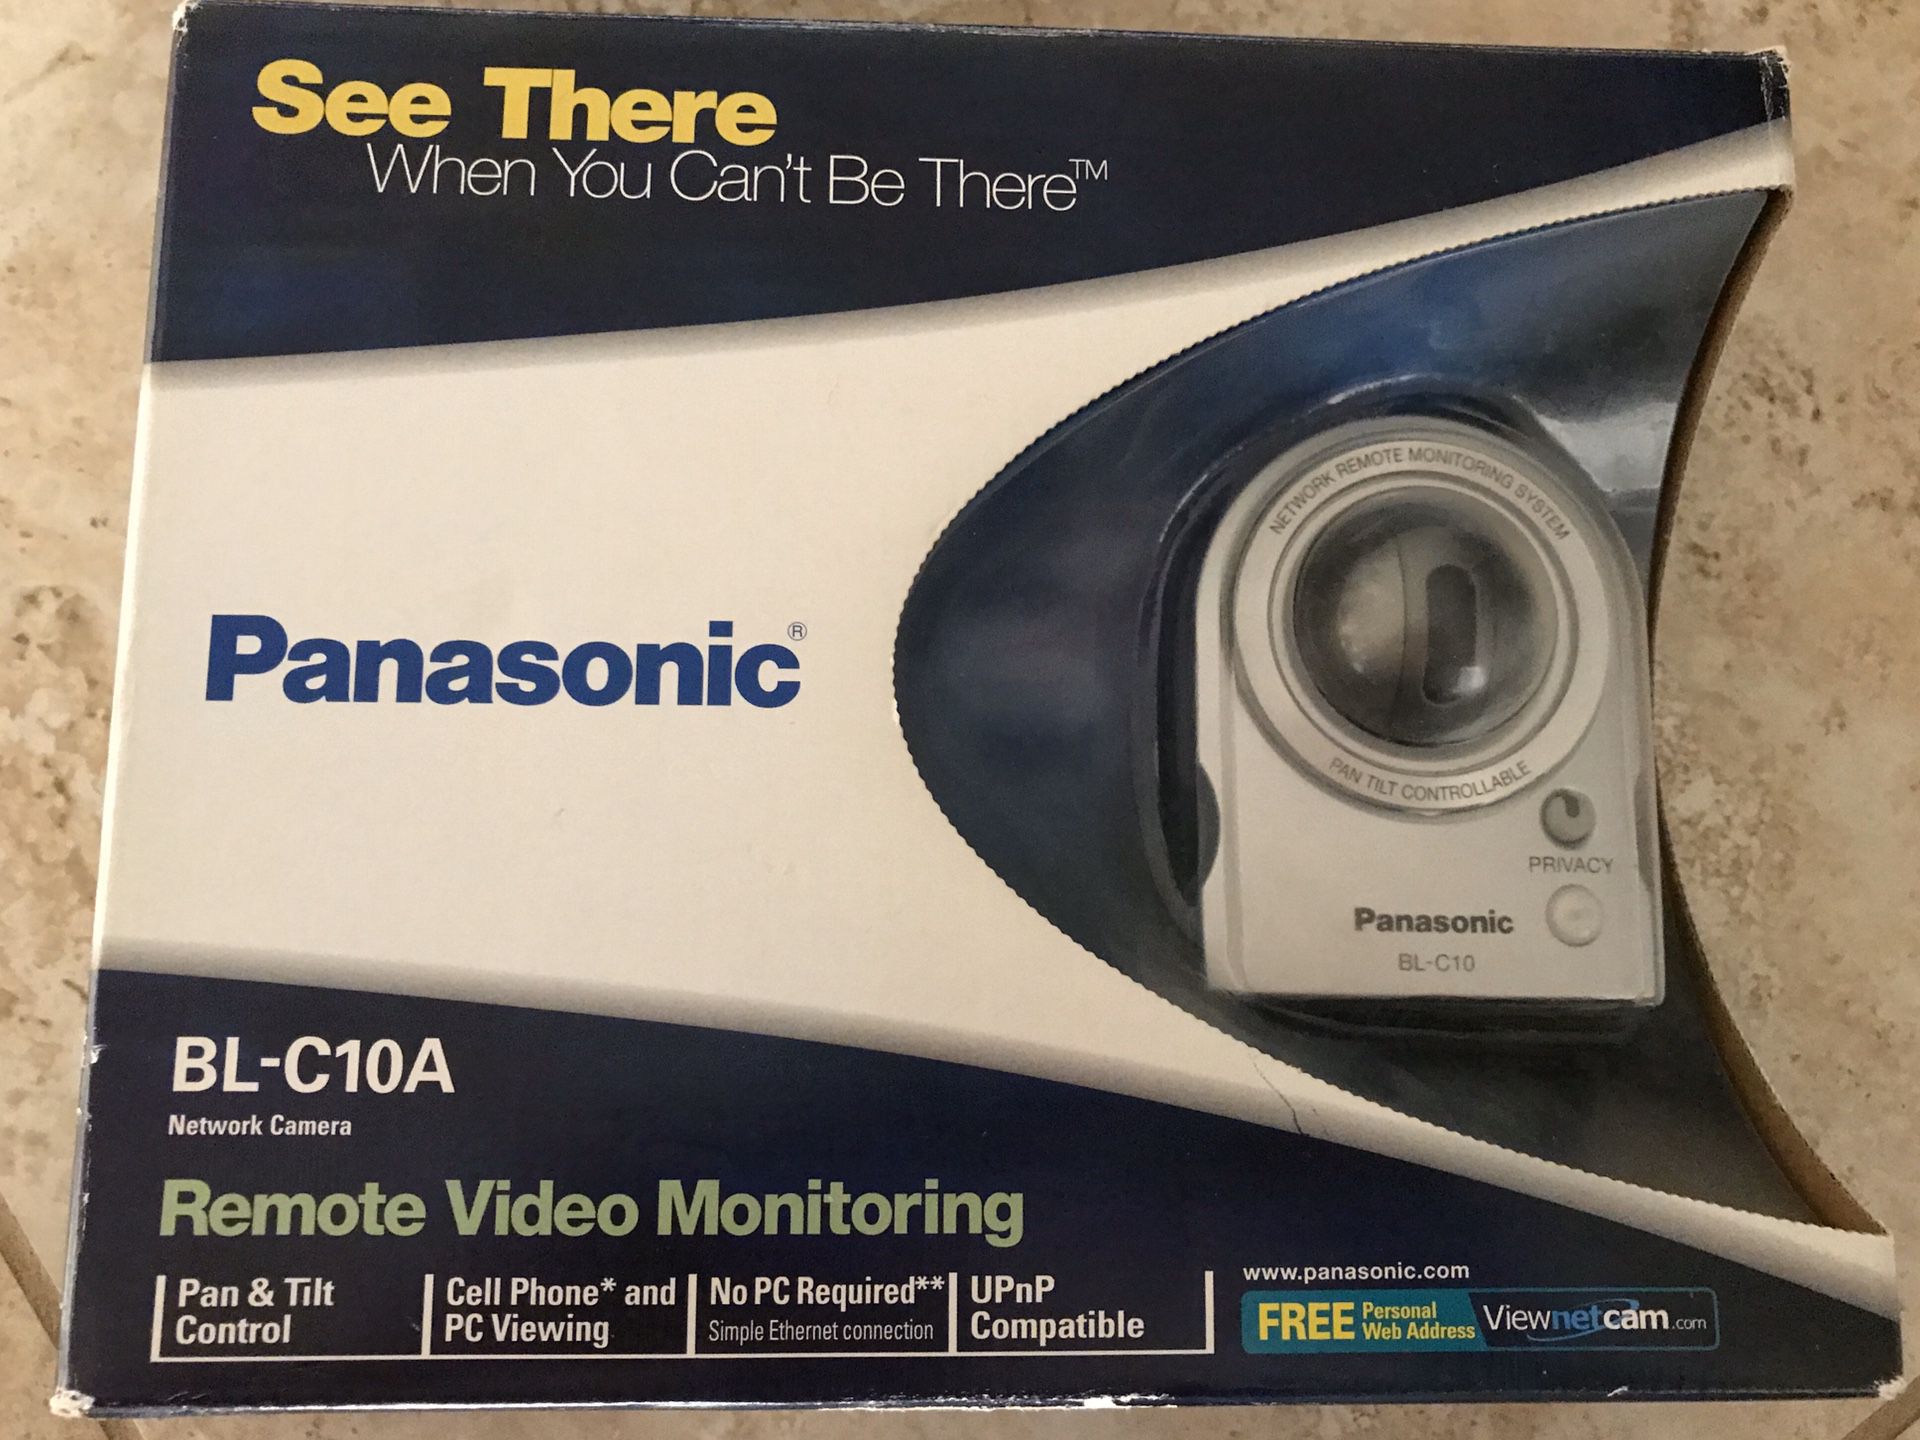 Panasonic BL-C10A Wired Network Camera. Remote Video Monitoring